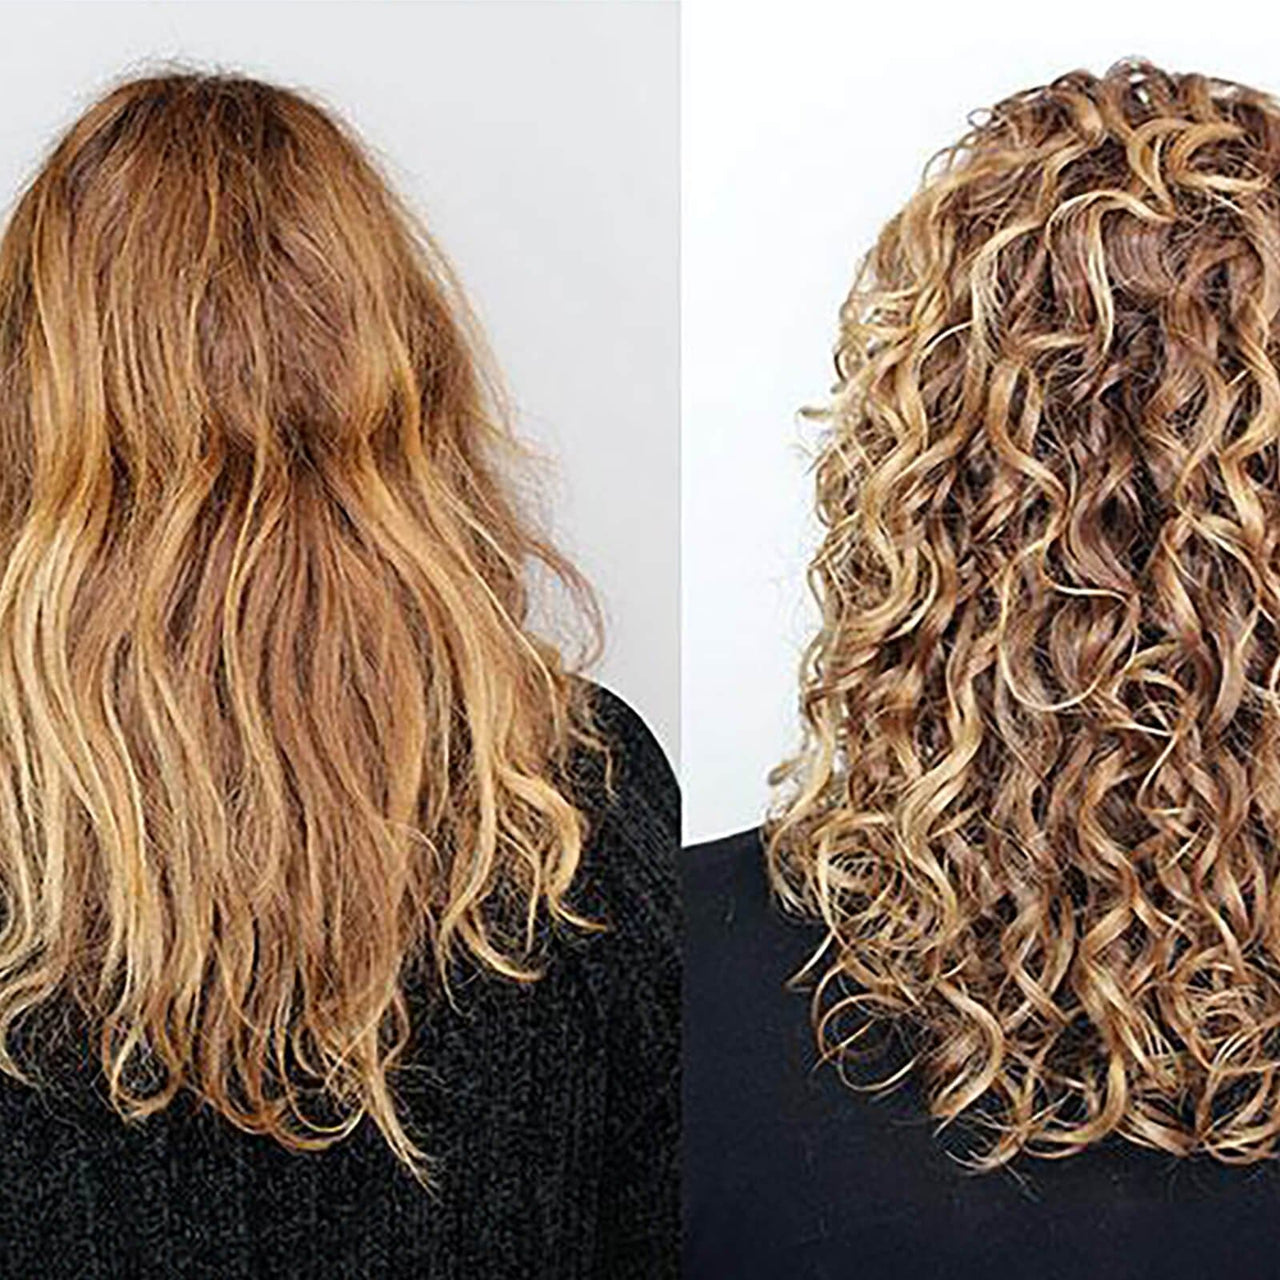 Olaplex No.3 Hair Perfector before after